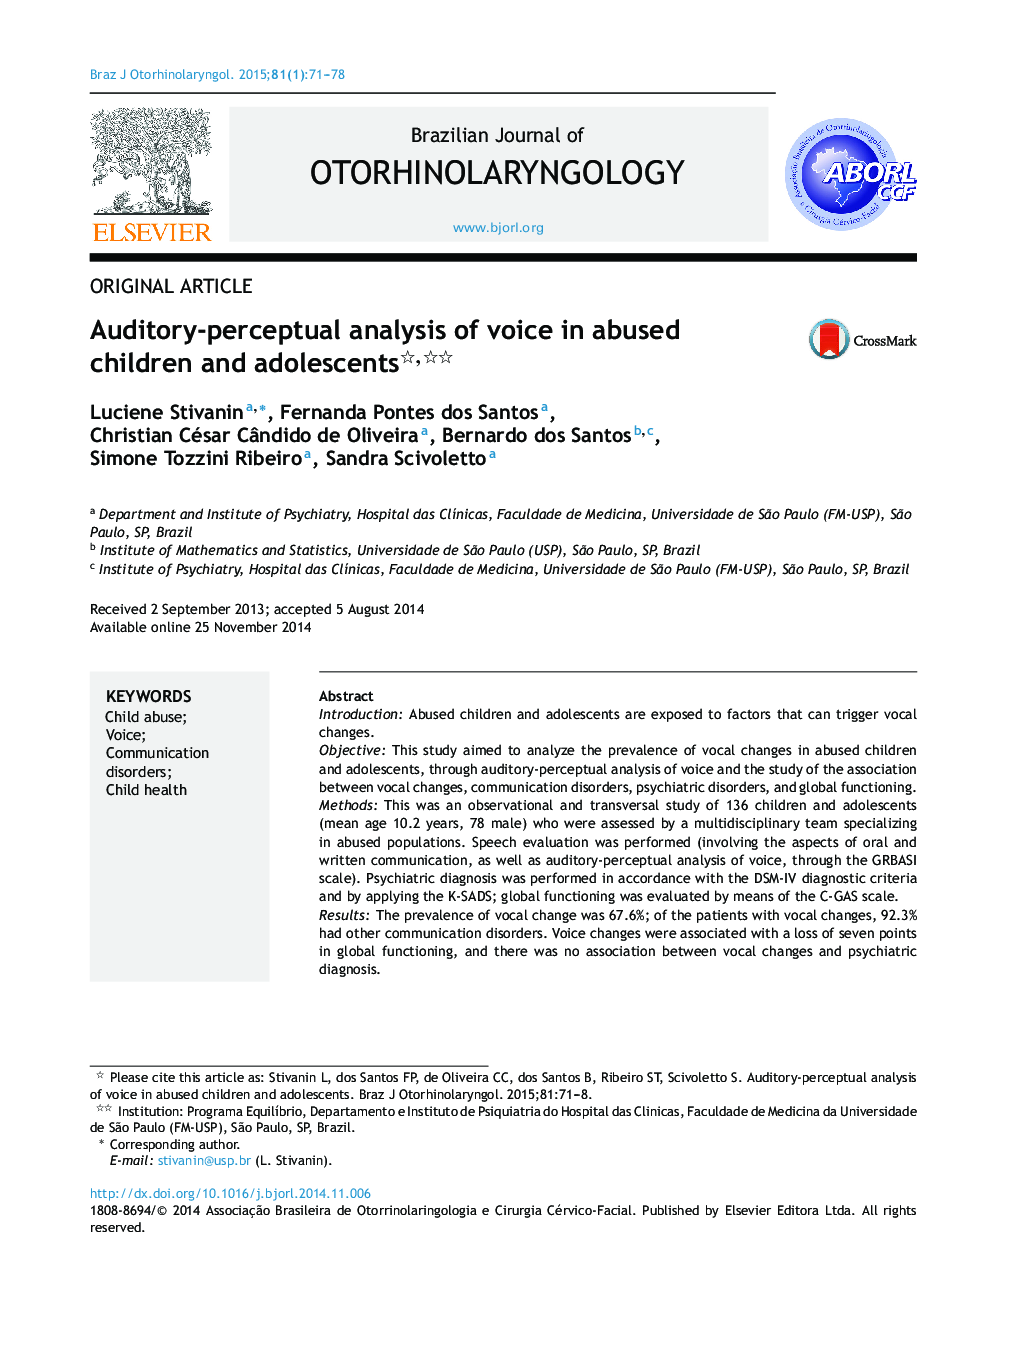 Auditory-perceptual analysis of voice in abused children and adolescents 